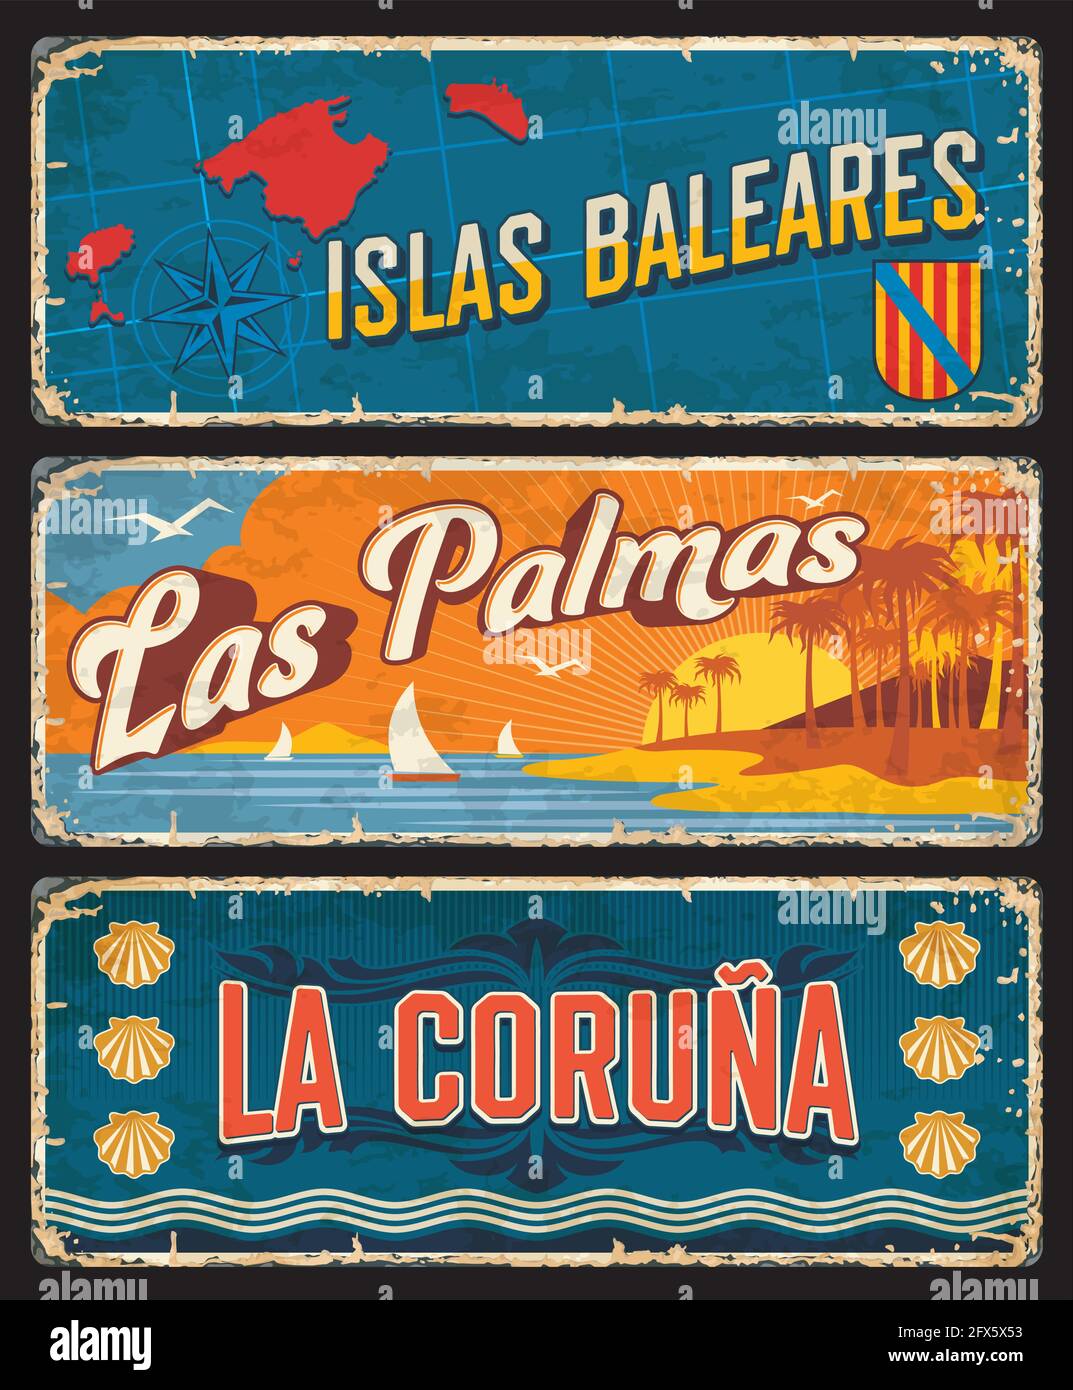 Spain Baleares Islas, Las Palmas and La Coruna plates and tin rusty signs, vector. Spanish Balearic islands, community and metal rusty plates with cit Stock Vector